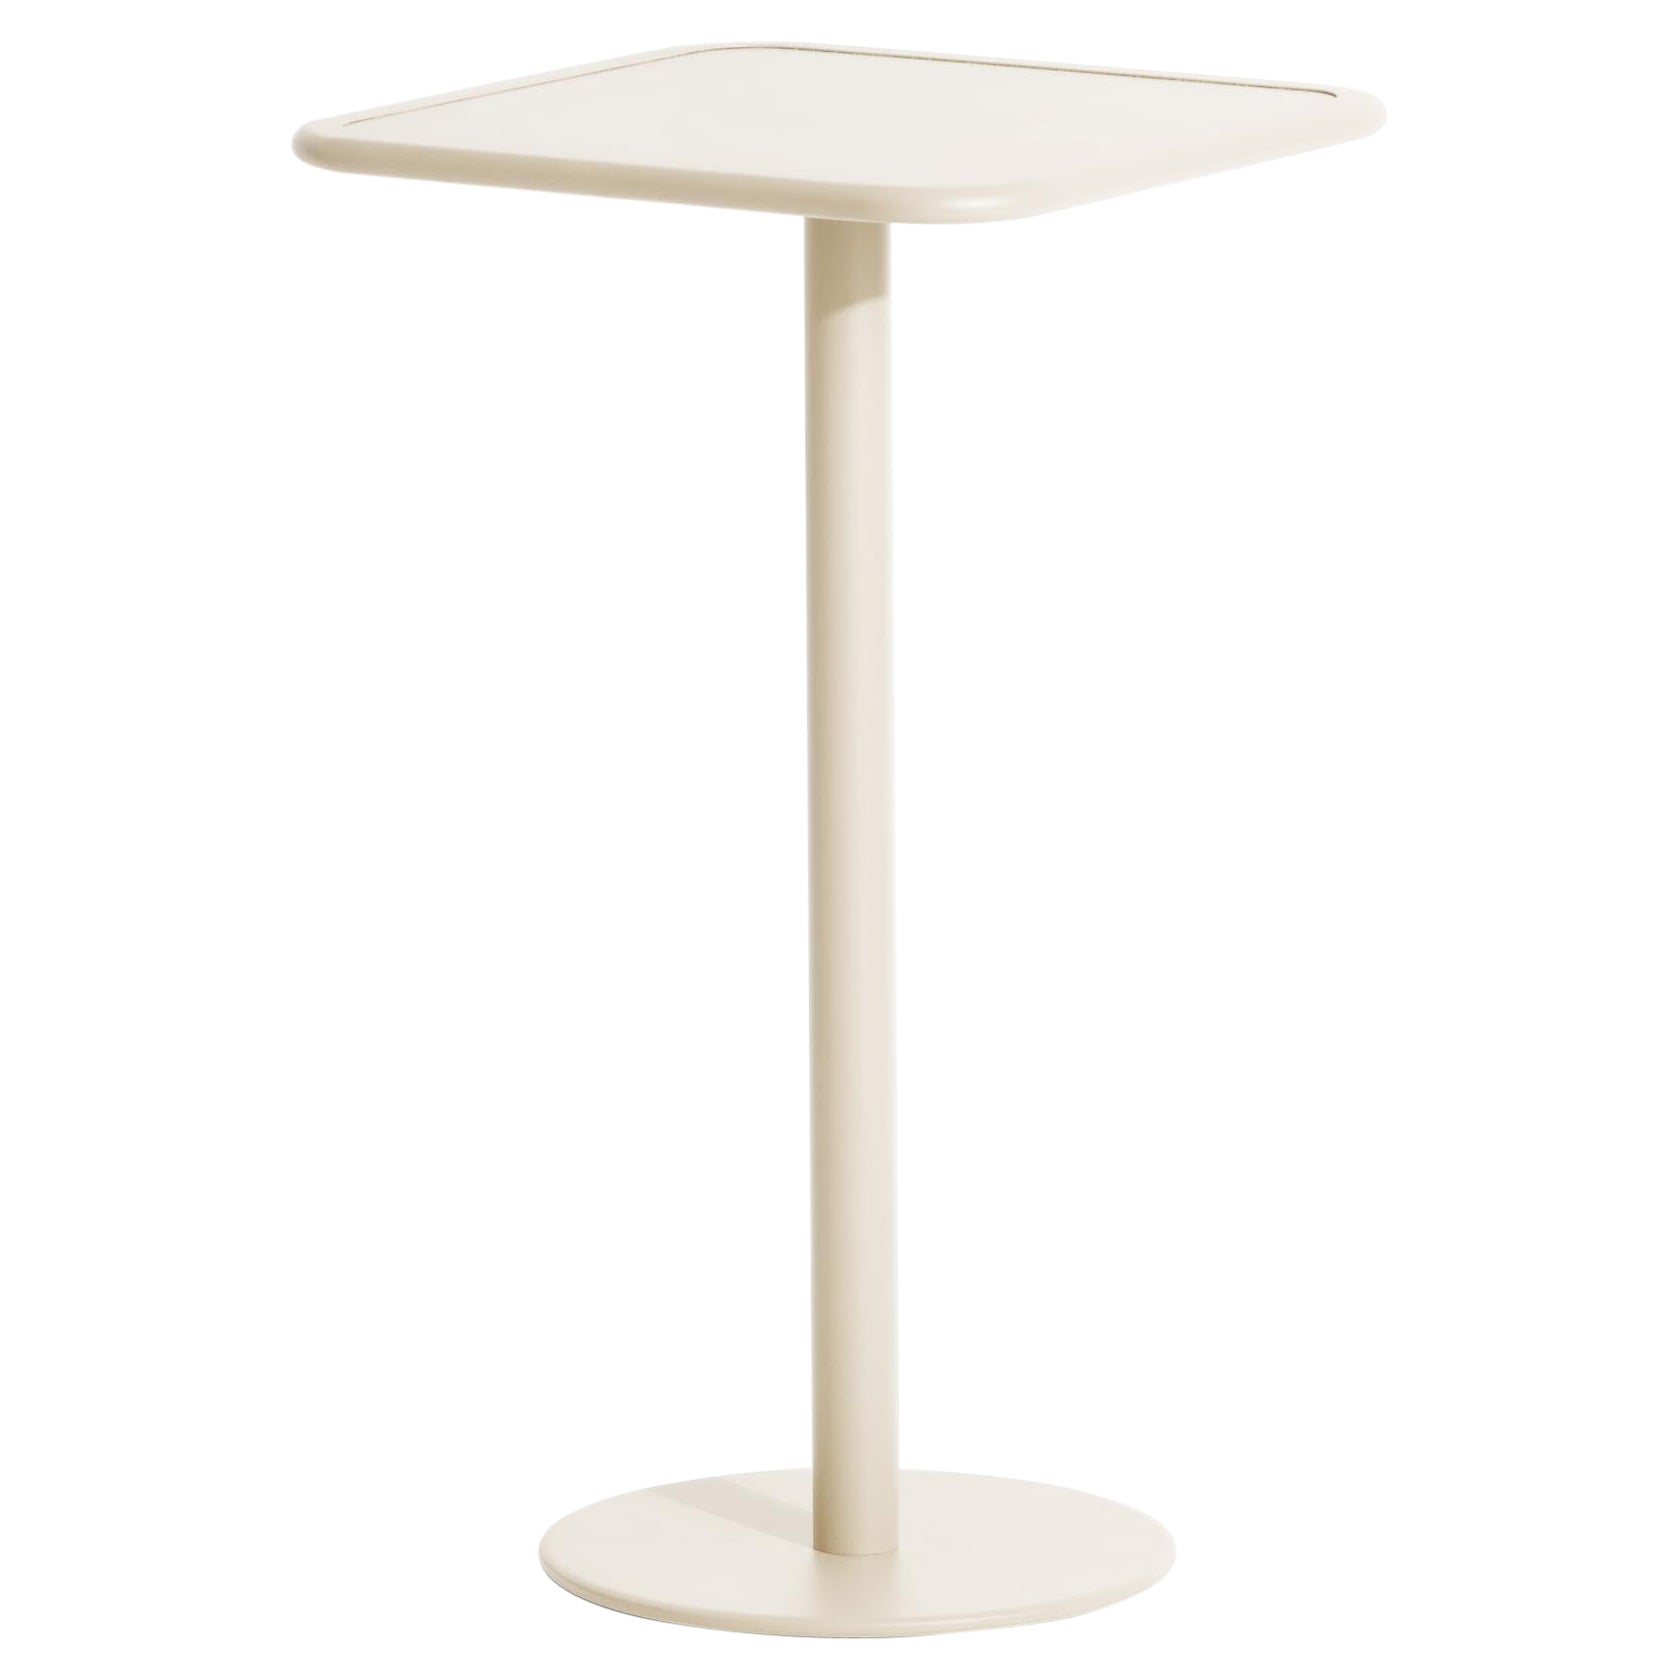 Petite Friture Week-End Square High Table in Ivory Aluminium, 2017 For Sale